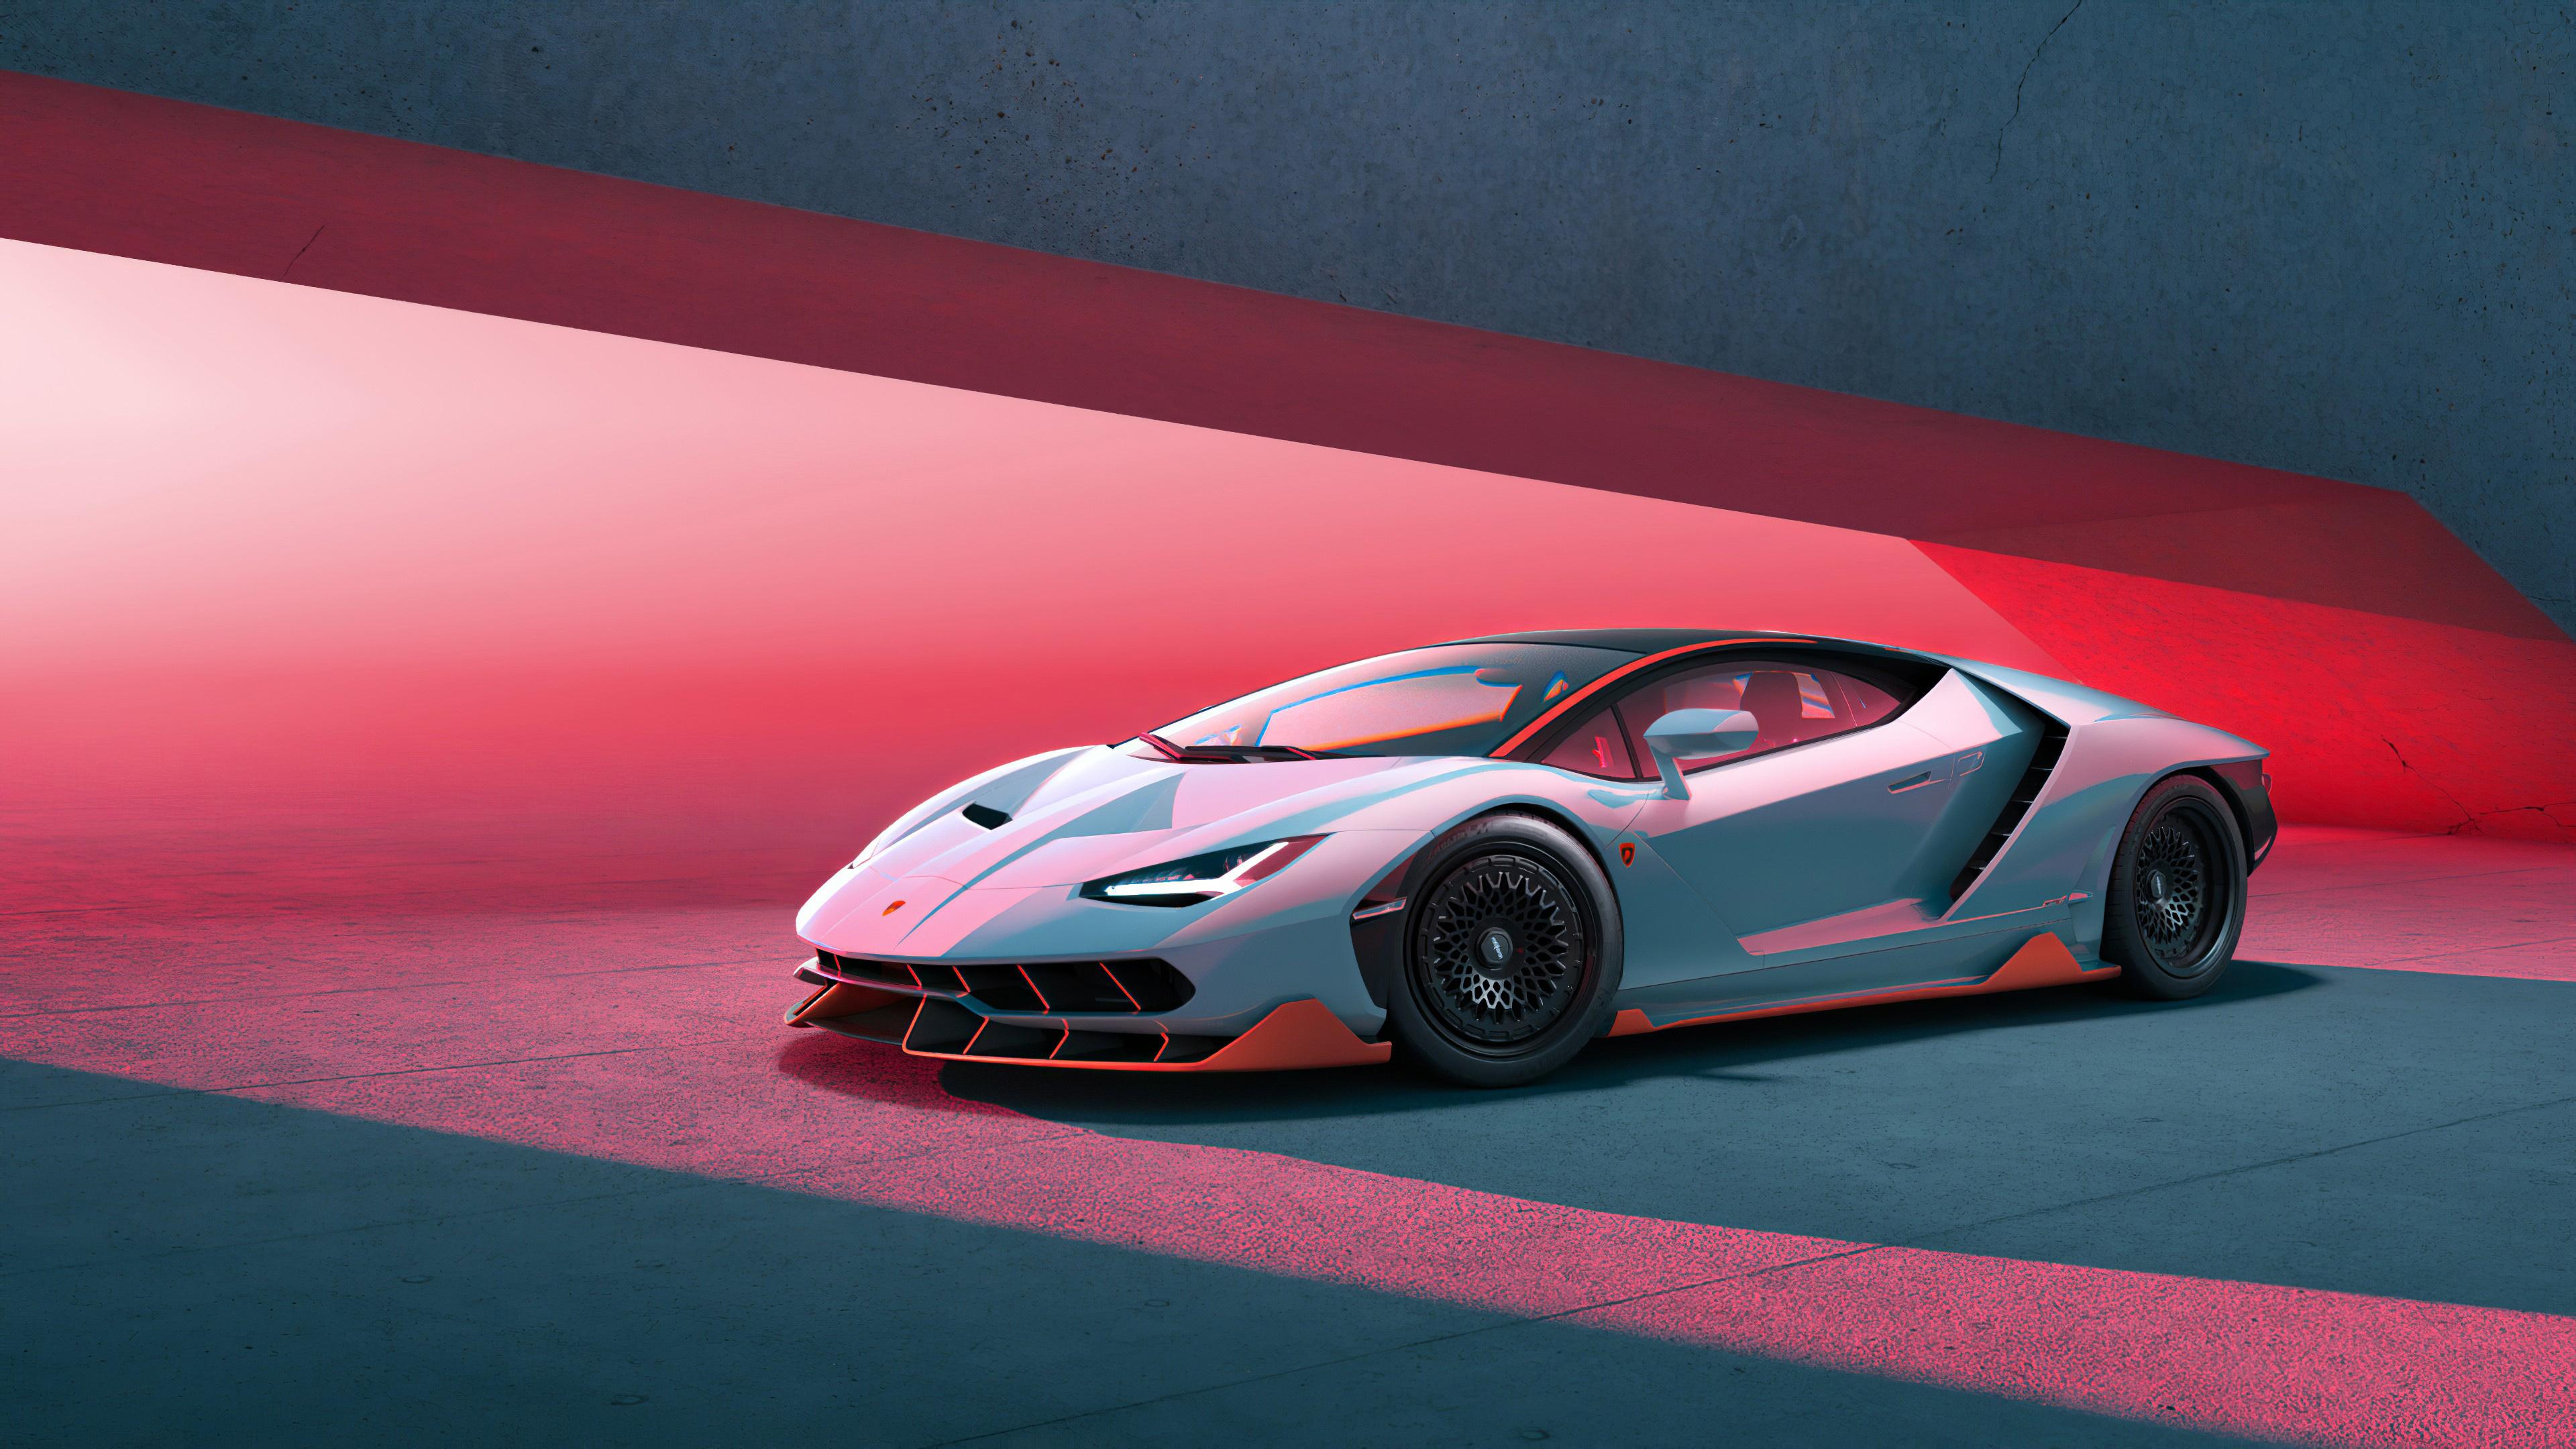 Lamborghini 4K wallpaper for your desktop or mobile screen free and easy to download